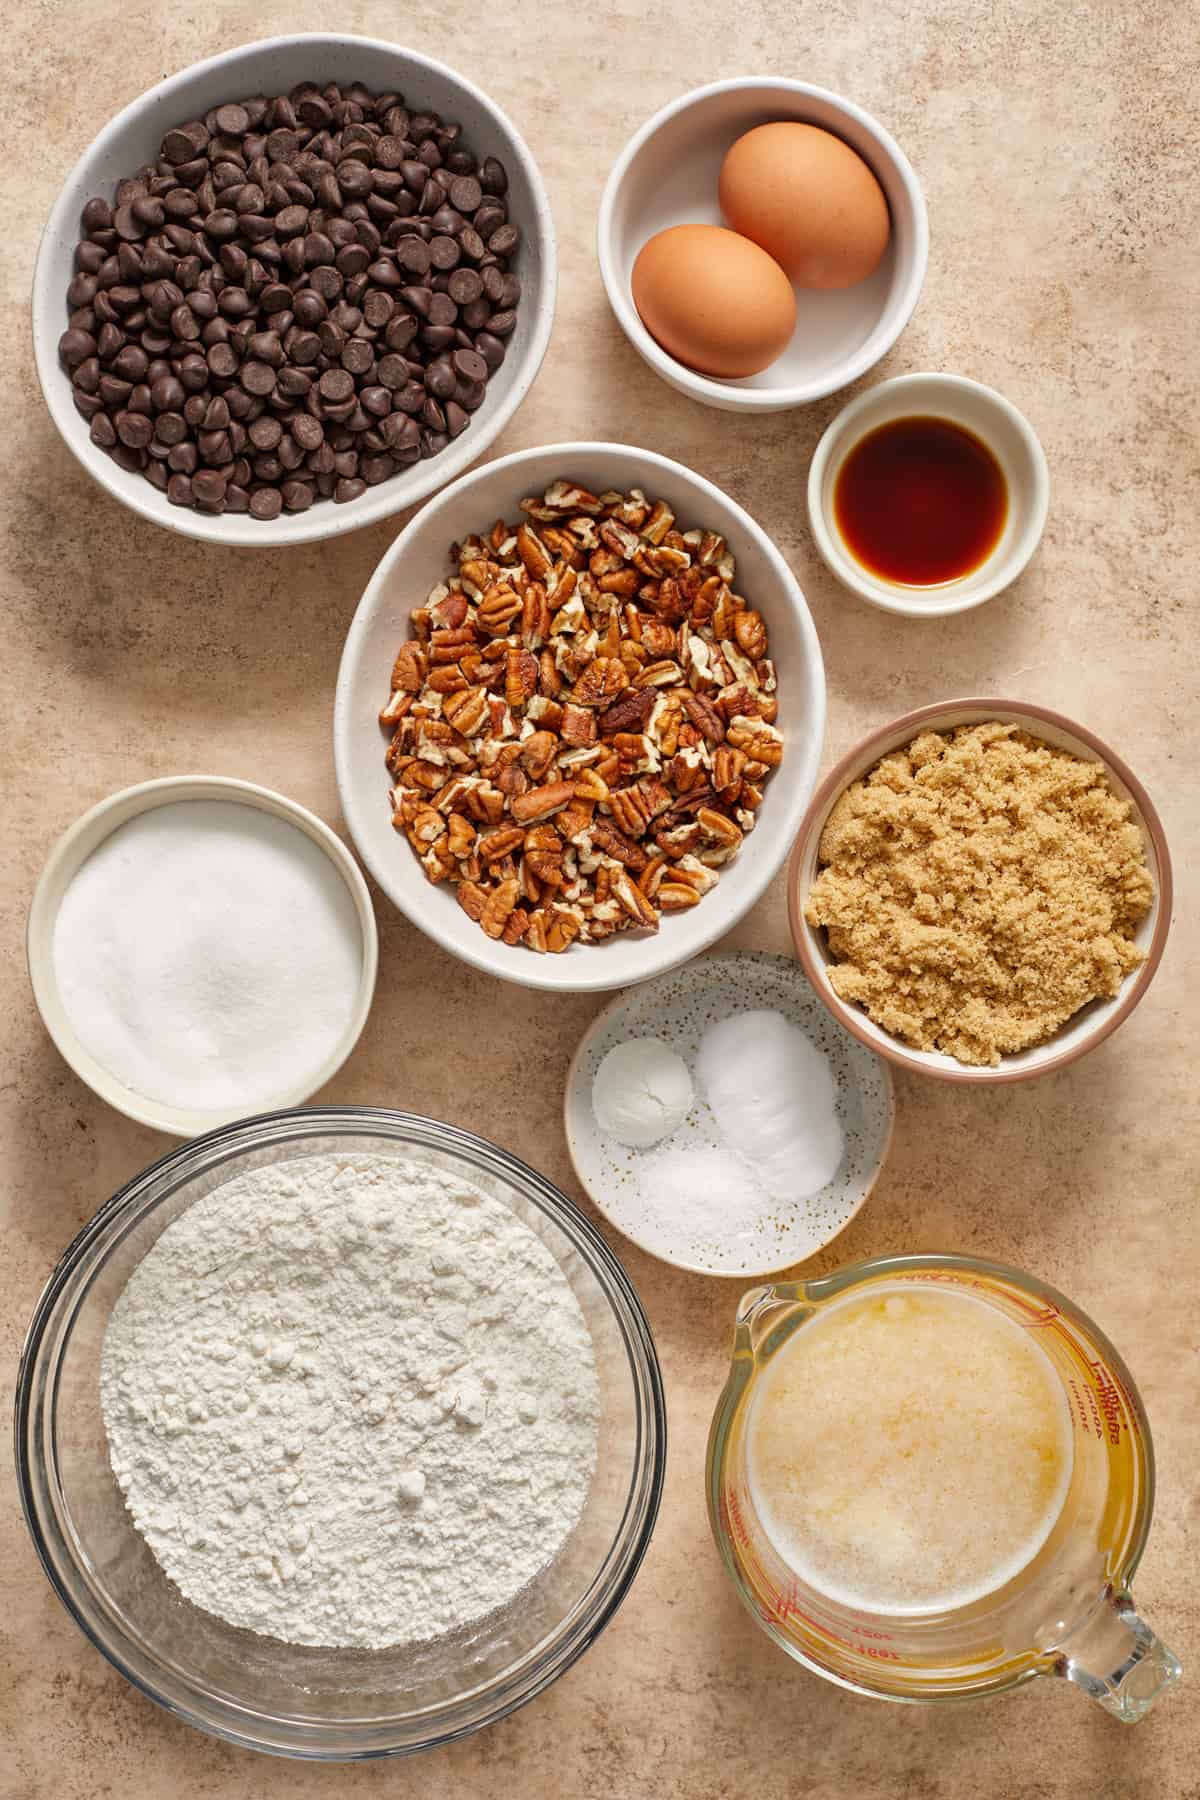 Butter, eggs, flour, pecans, chocolate chips and other ingredients arranged on surface.